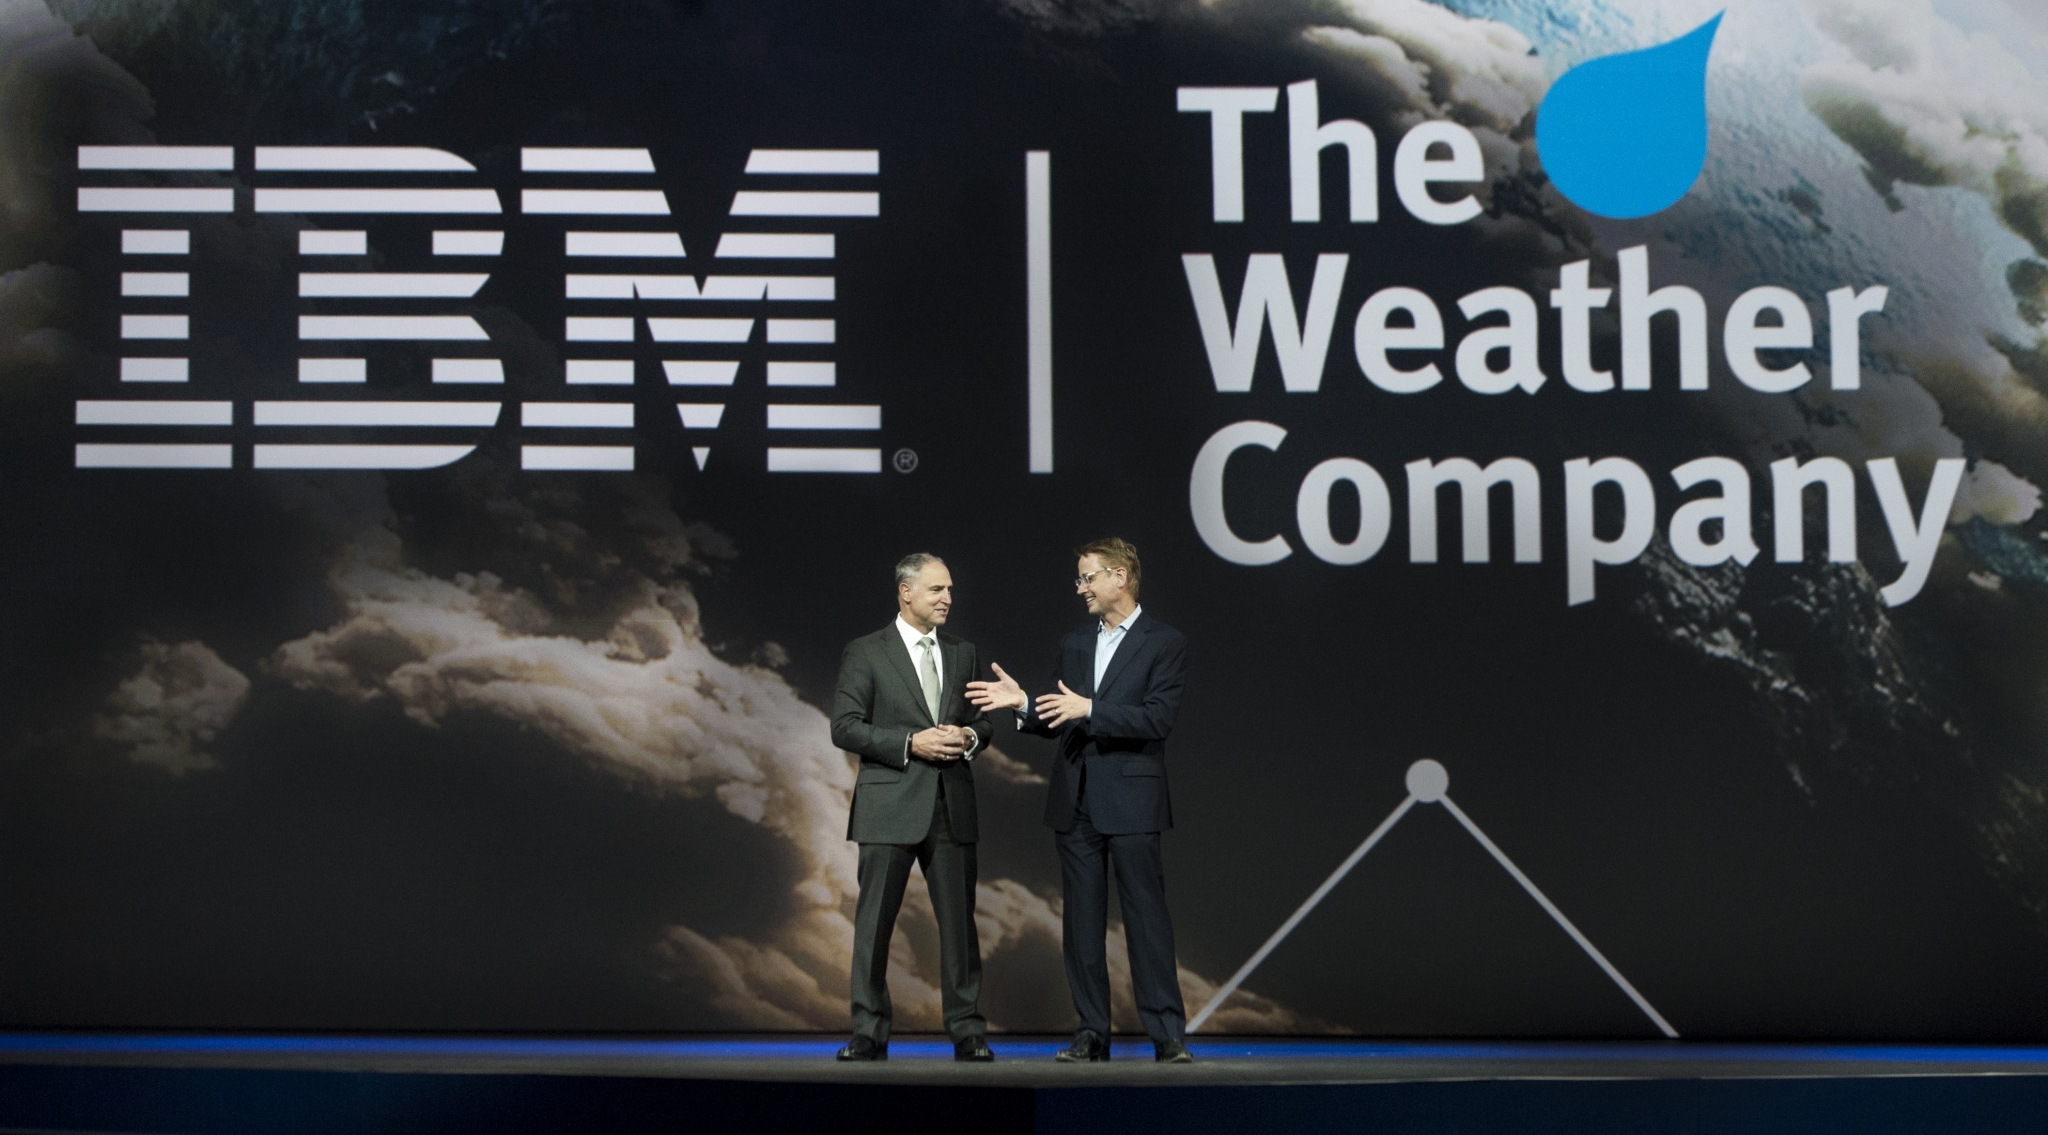 IBM Acquires Weather Company's Digital Properties for $2bn